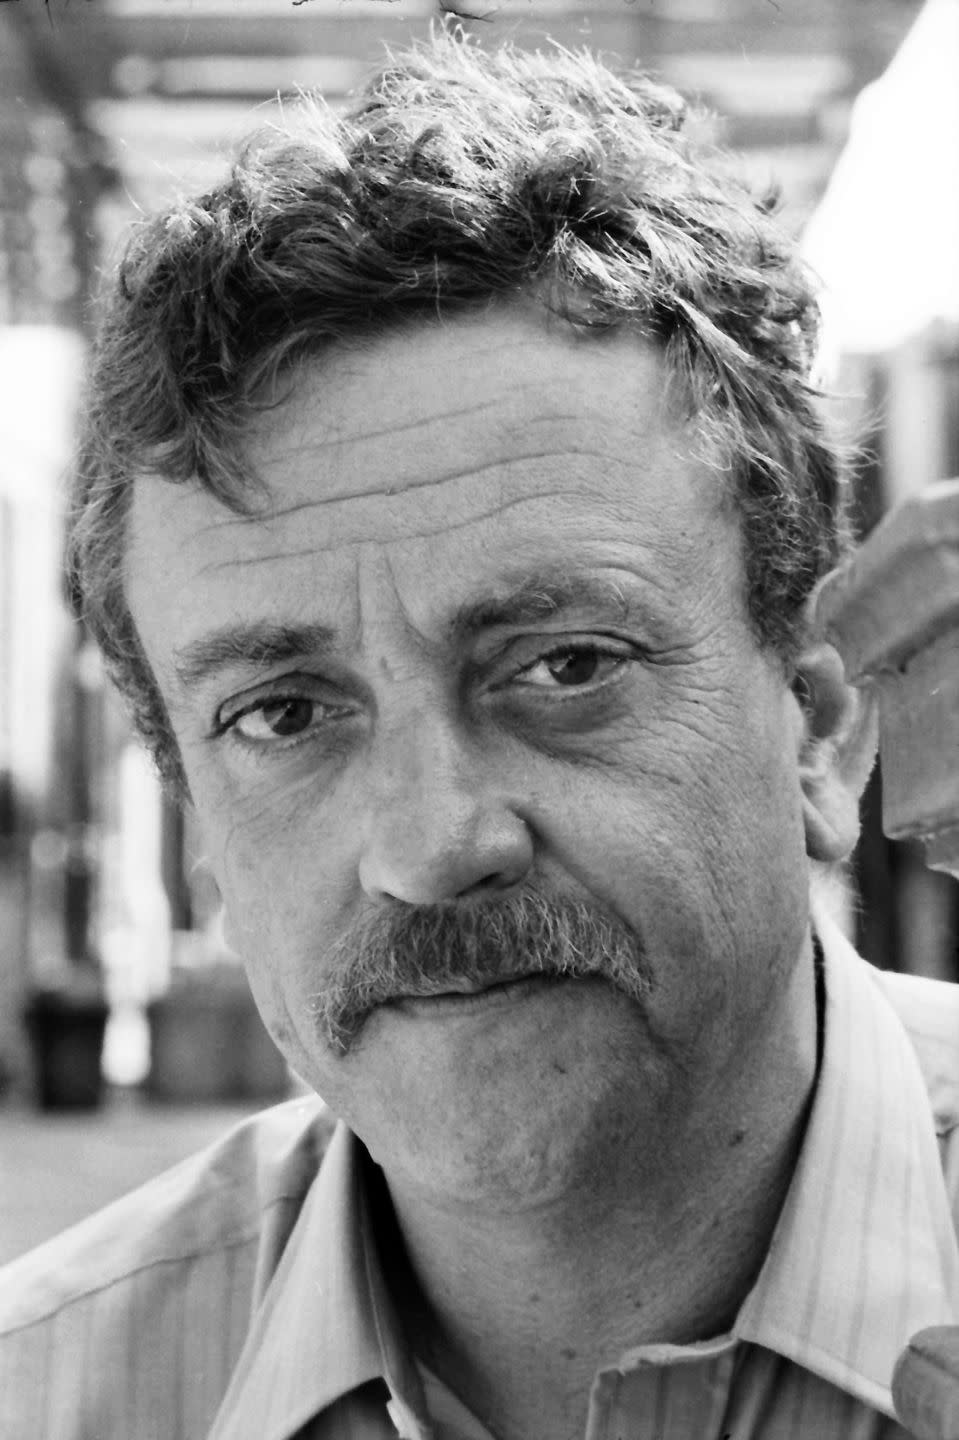 <p>Kurt Vonnegut was born and raised in Indianapolis, Indiana. He attended Cornell University, but later dropped up to join World War II. Captured by Germans during the Battle of the Bulge and interned at Dresden, he survived the Allied bombing by hiding in a meat locker of the slaughterhouse where he was being kept. After the war, he married, and published his first novel in 1952. It was not commercially successful, and though he published several novels over the 15+ years that were well regarded, it wasn’t until his sixth novel in 1969, Slaughterhouse Five, that he became a bestseller and a household name. Loosely based on his own experiences during WWII, the anti-war overtones resonated with Americans during the ongoing protests of the Vietnam War.</p>